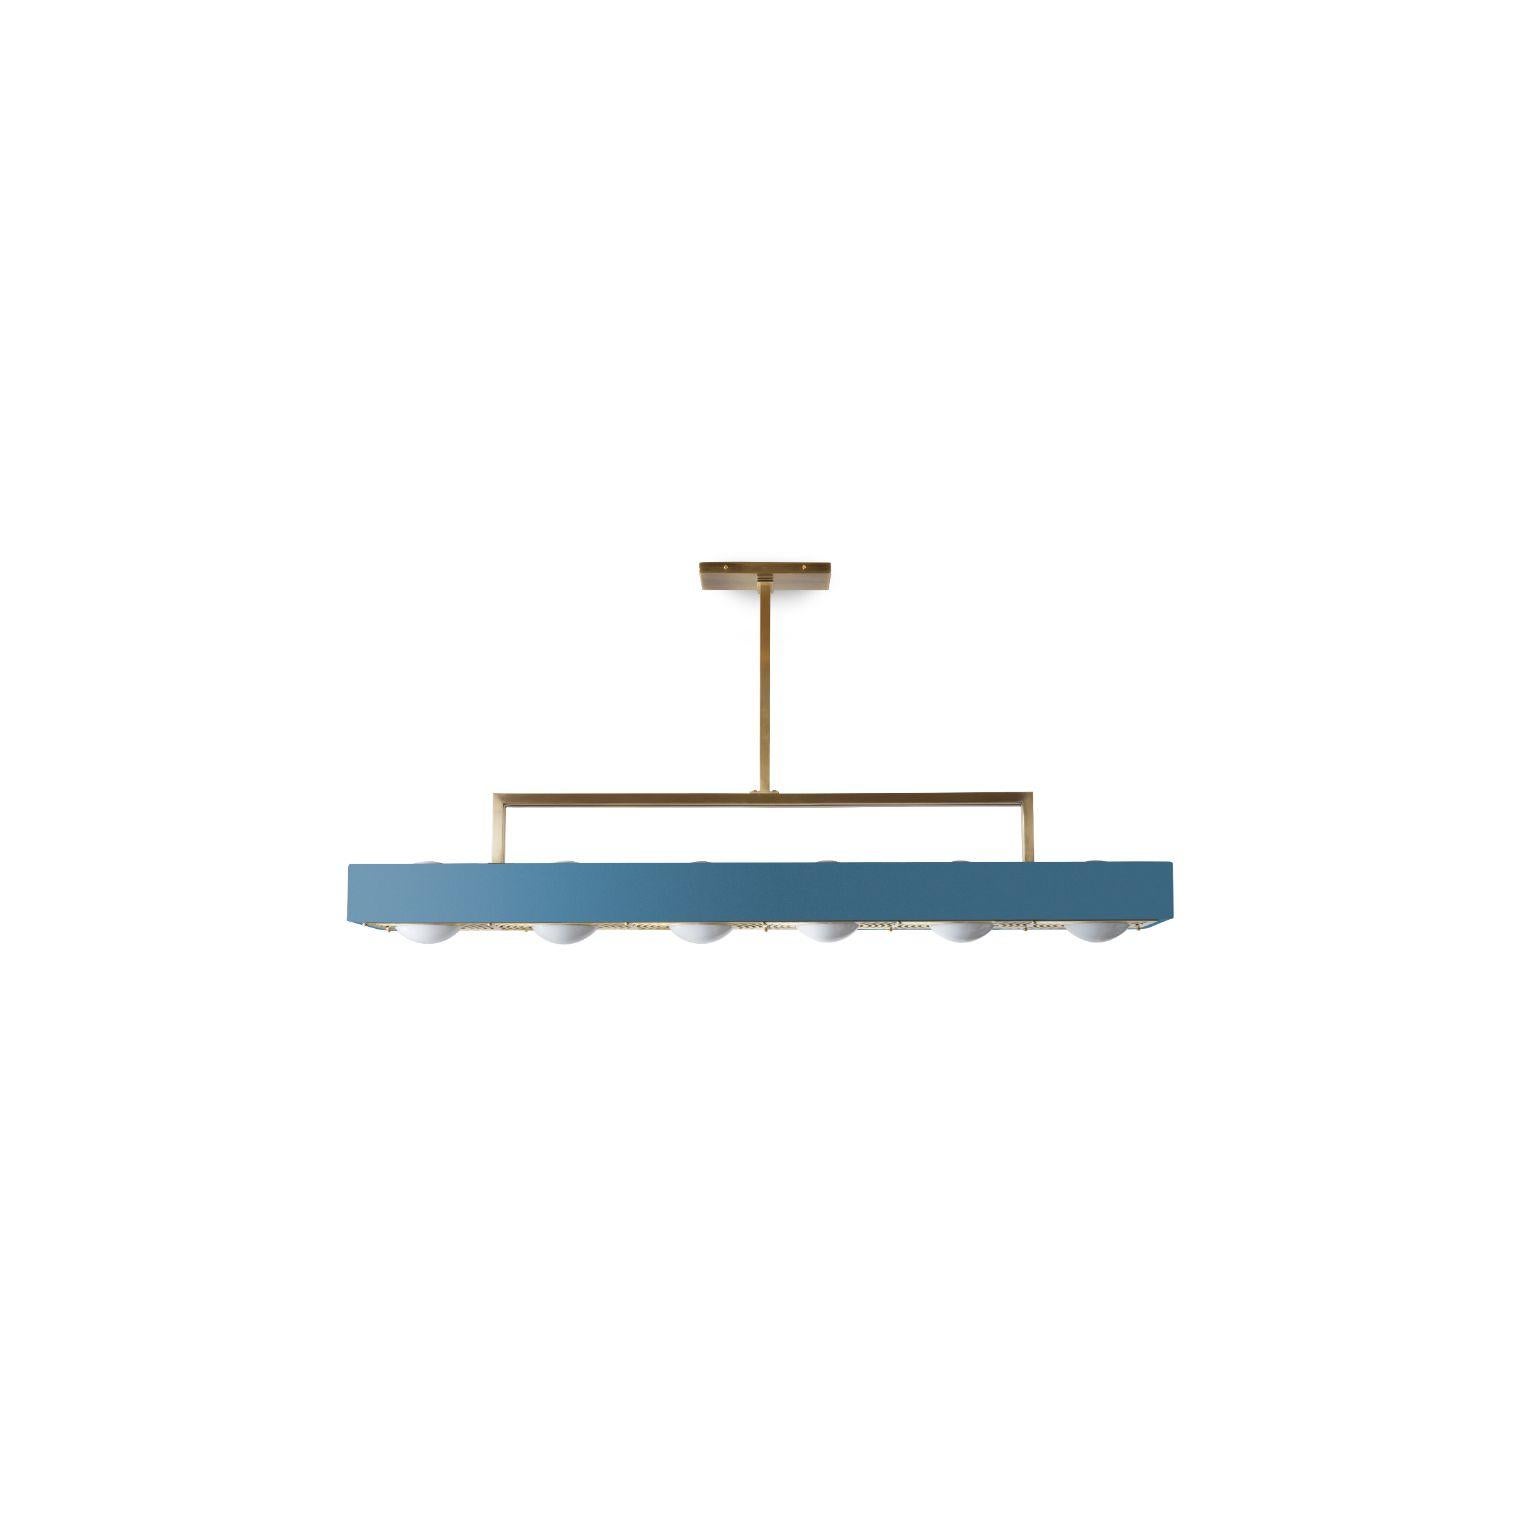 Kernel pendant light XL - Blue by Bert Frank
Dimensions: 22.6 (only lamp) x 119 x 20 cm
Materials: Brass, steel

Also available: in white and black.

When Adam Yeats and Robbie Llewellyn founded Bert Frank in 2013 it was a meeting of minds and